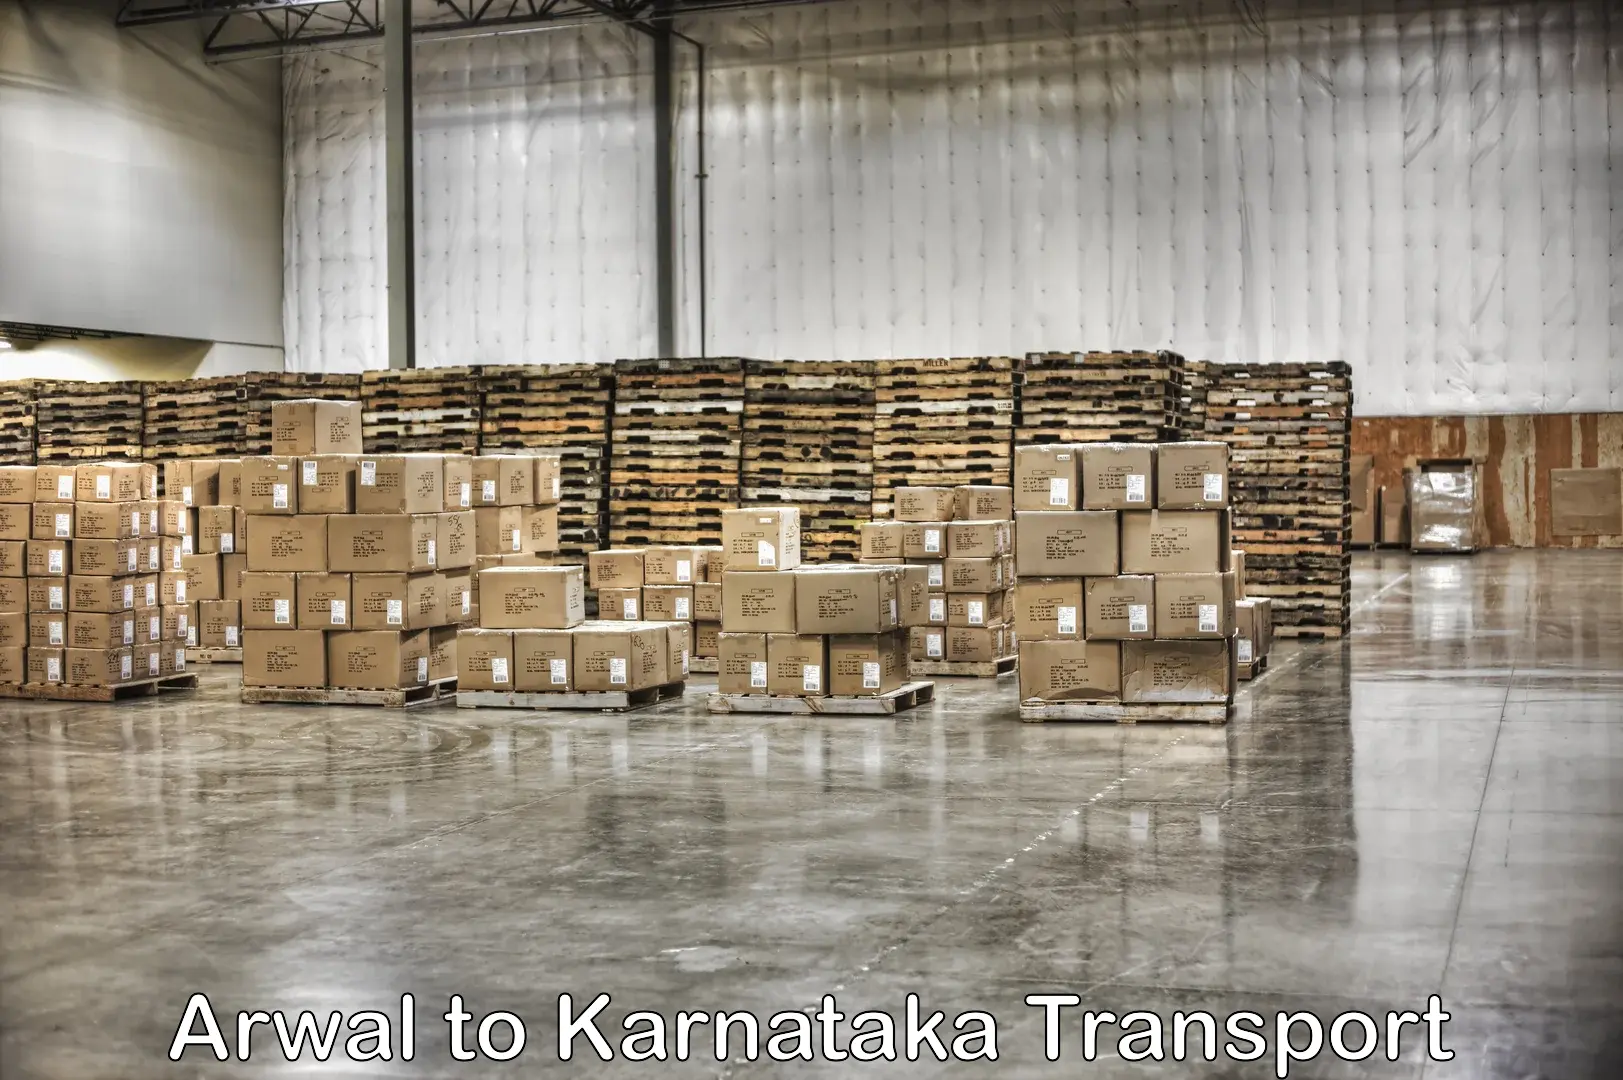 Daily transport service Arwal to Mangalore Port